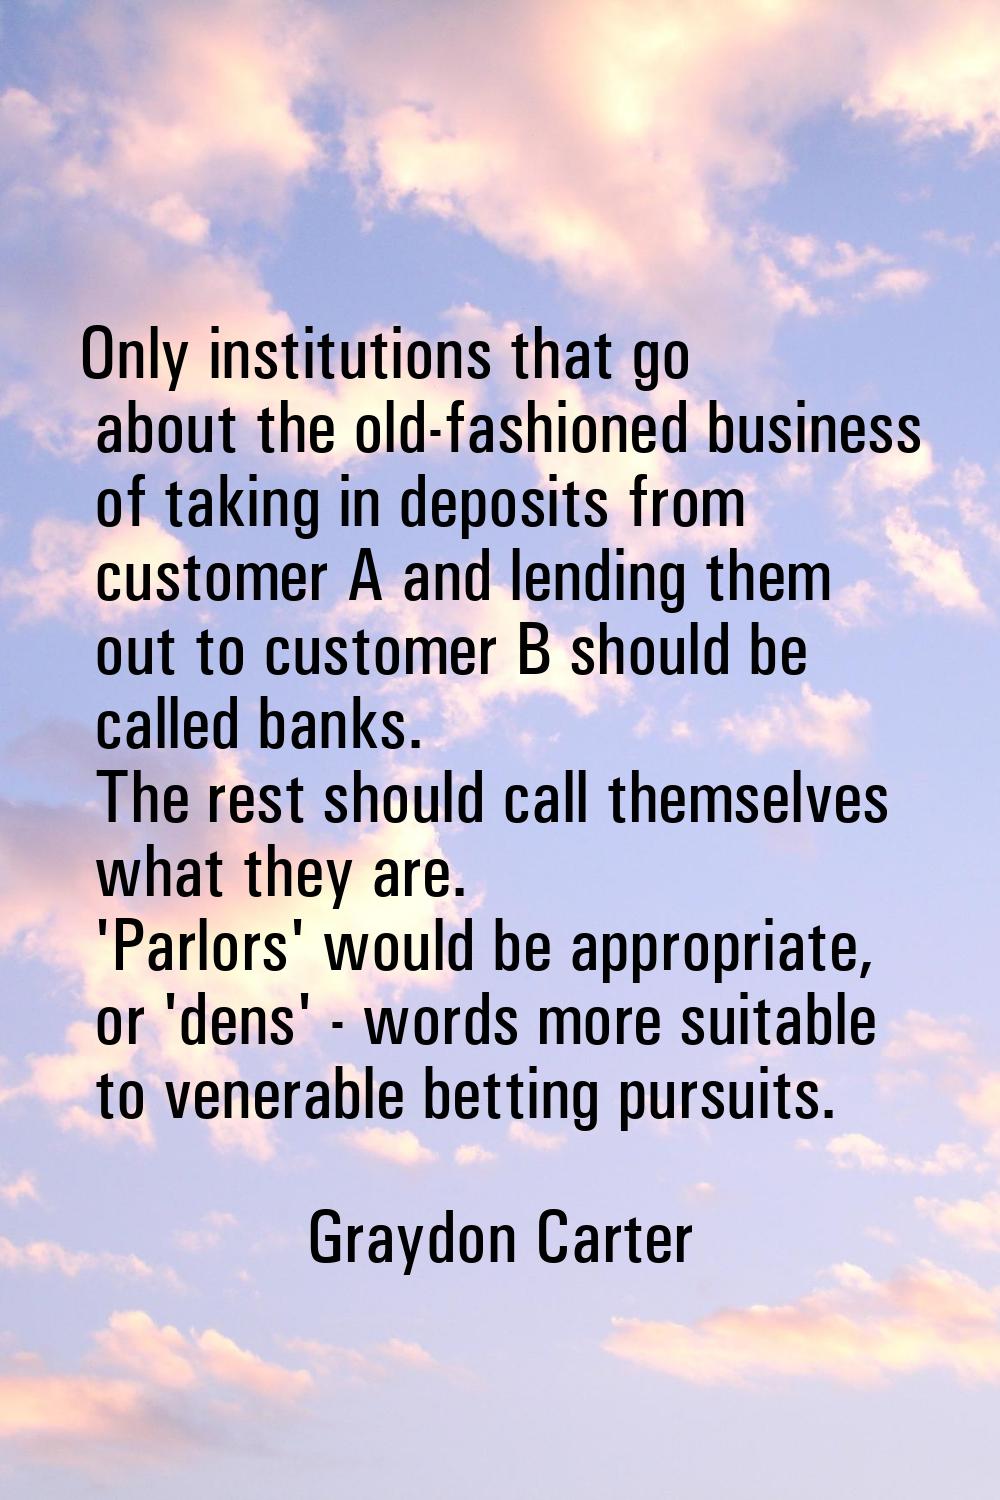 Only institutions that go about the old-fashioned business of taking in deposits from customer A an